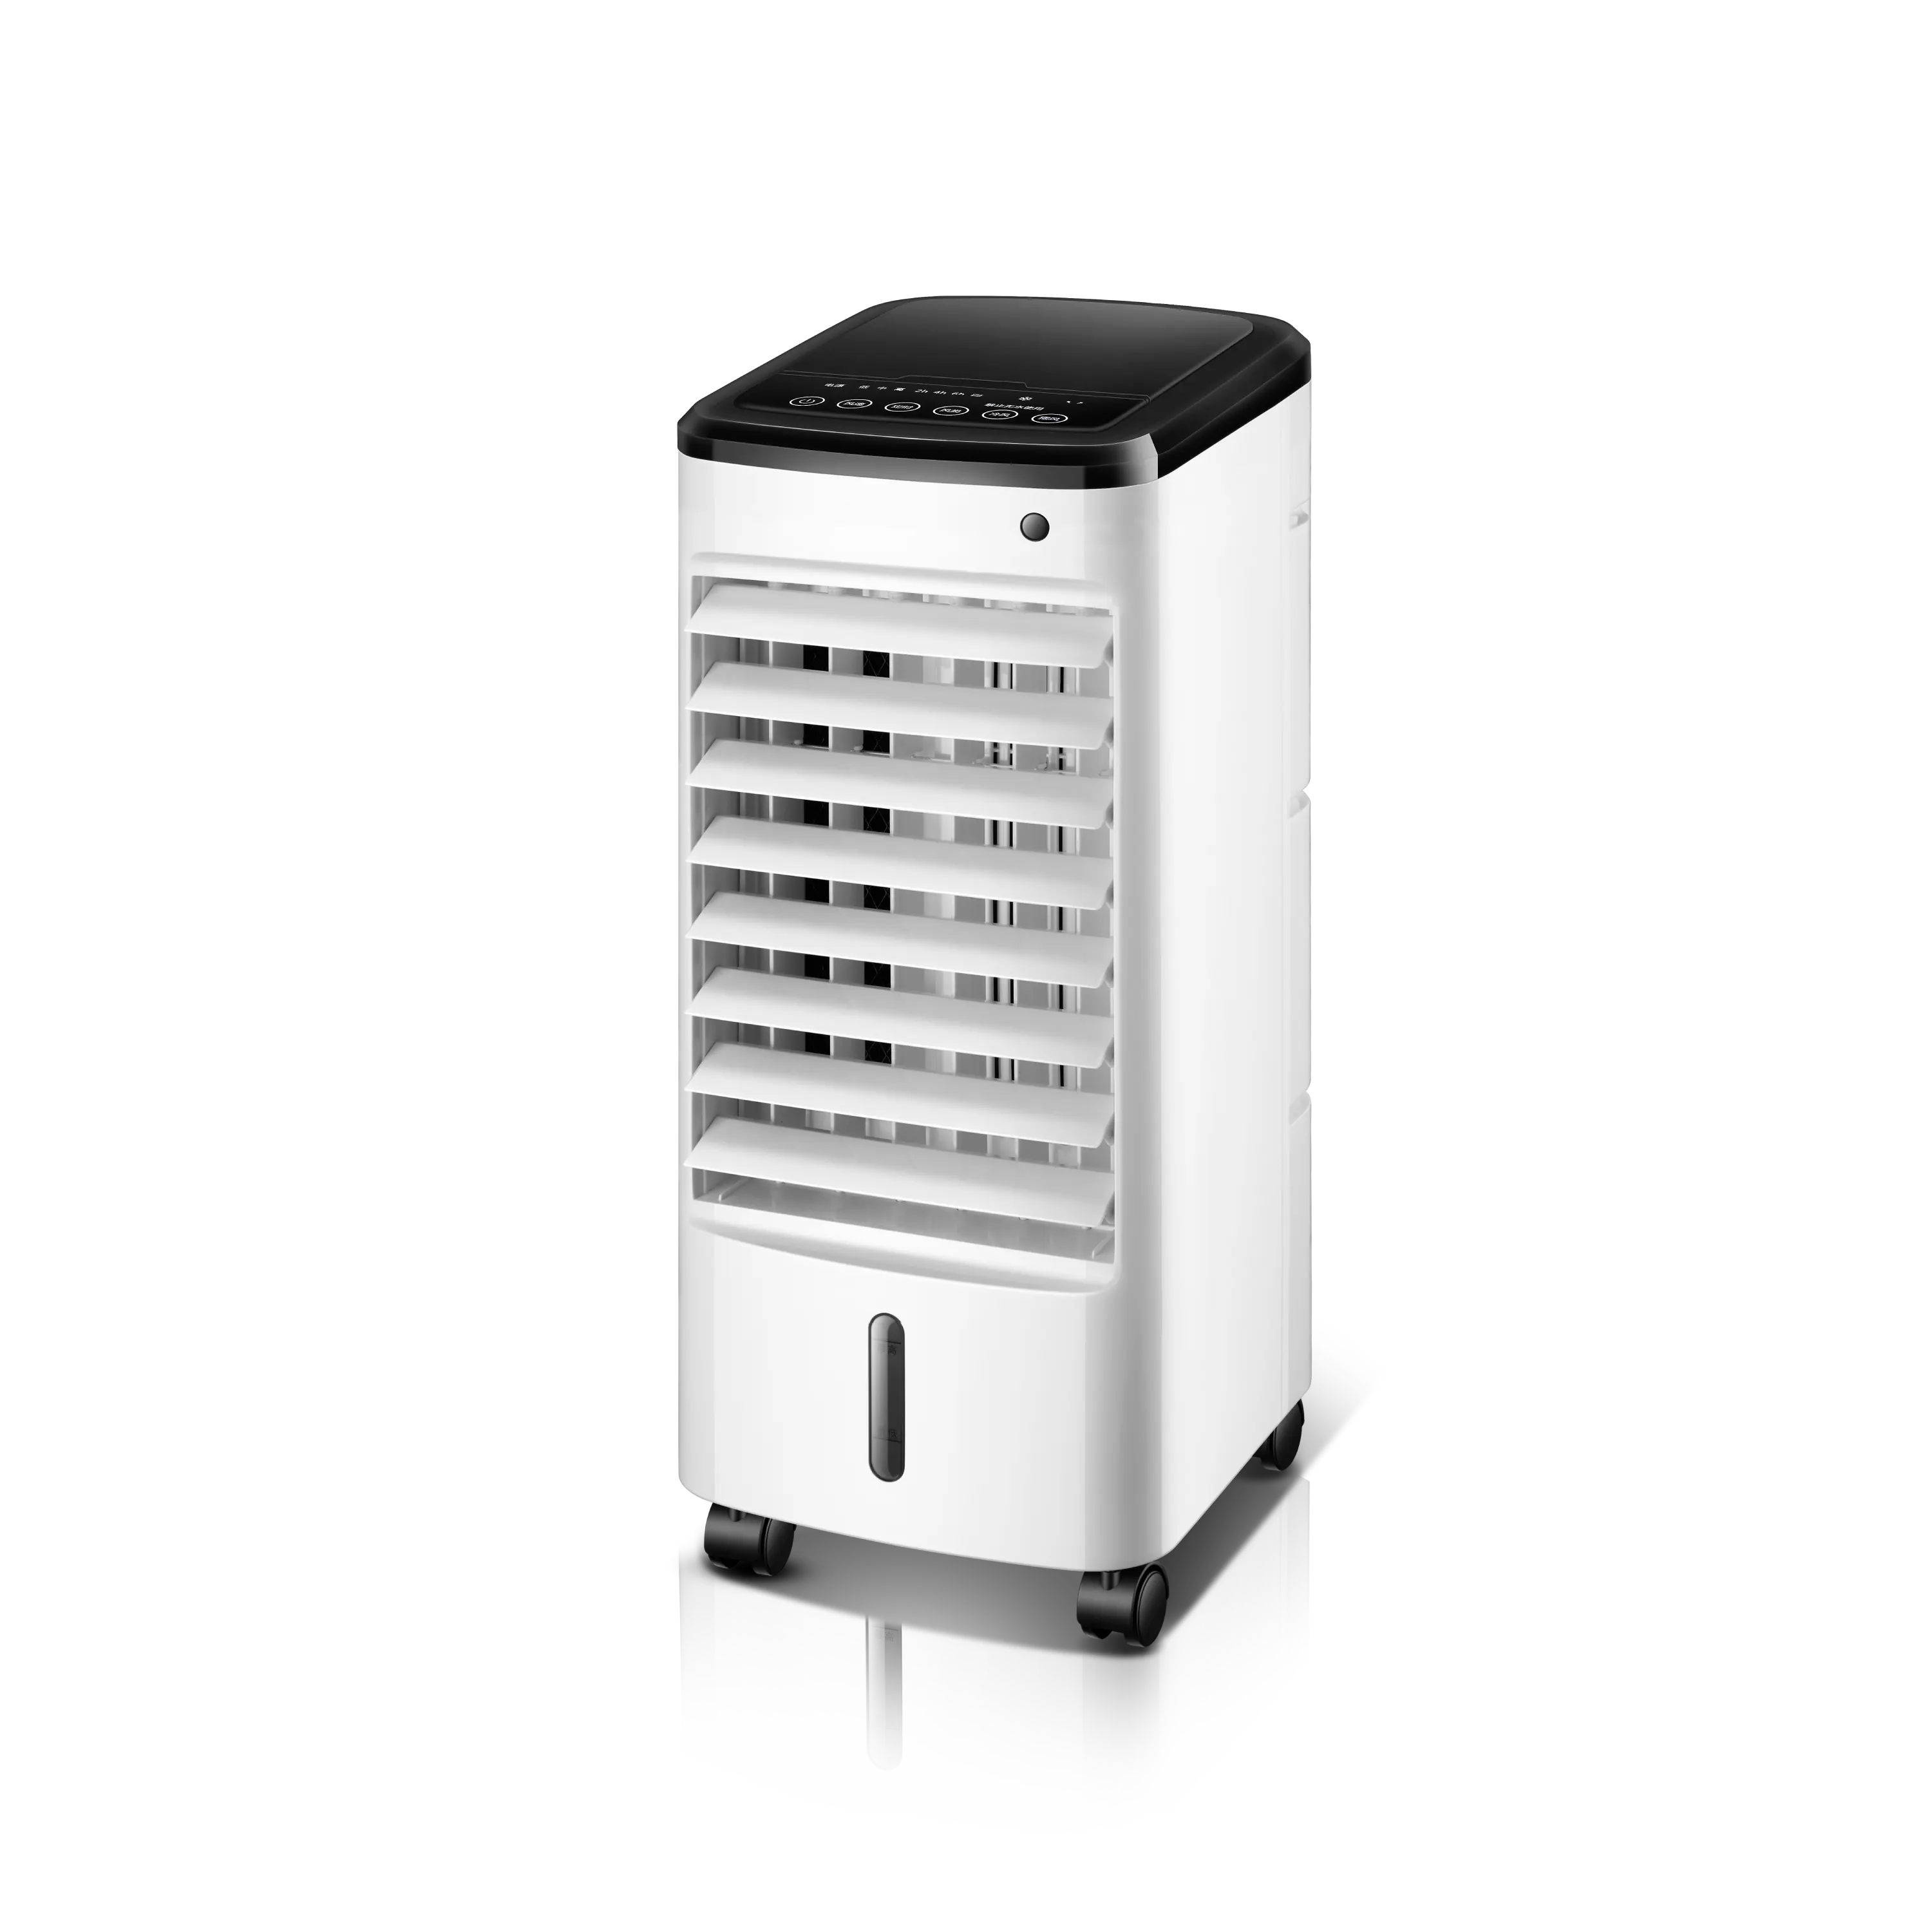 Top Ranking Air Conditioner Portable Indoor And Outdoor Evaporative Air Cooler For Home Room